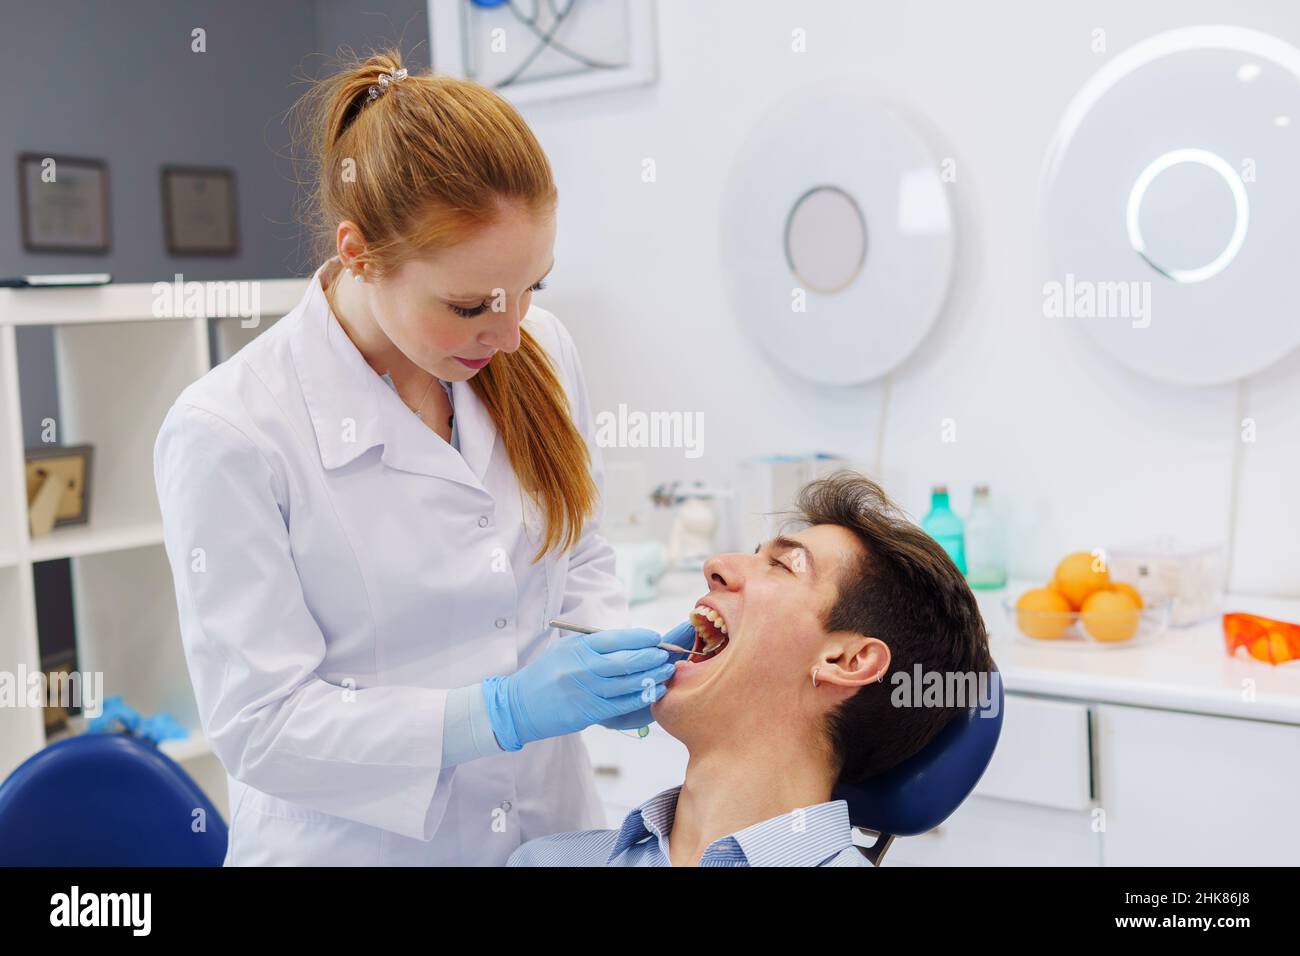 Redhead woman in white robe and latex gloves with ginger ponytail using mirror to inspect teeth of man with opened mouth in dental clinic Stock Photo